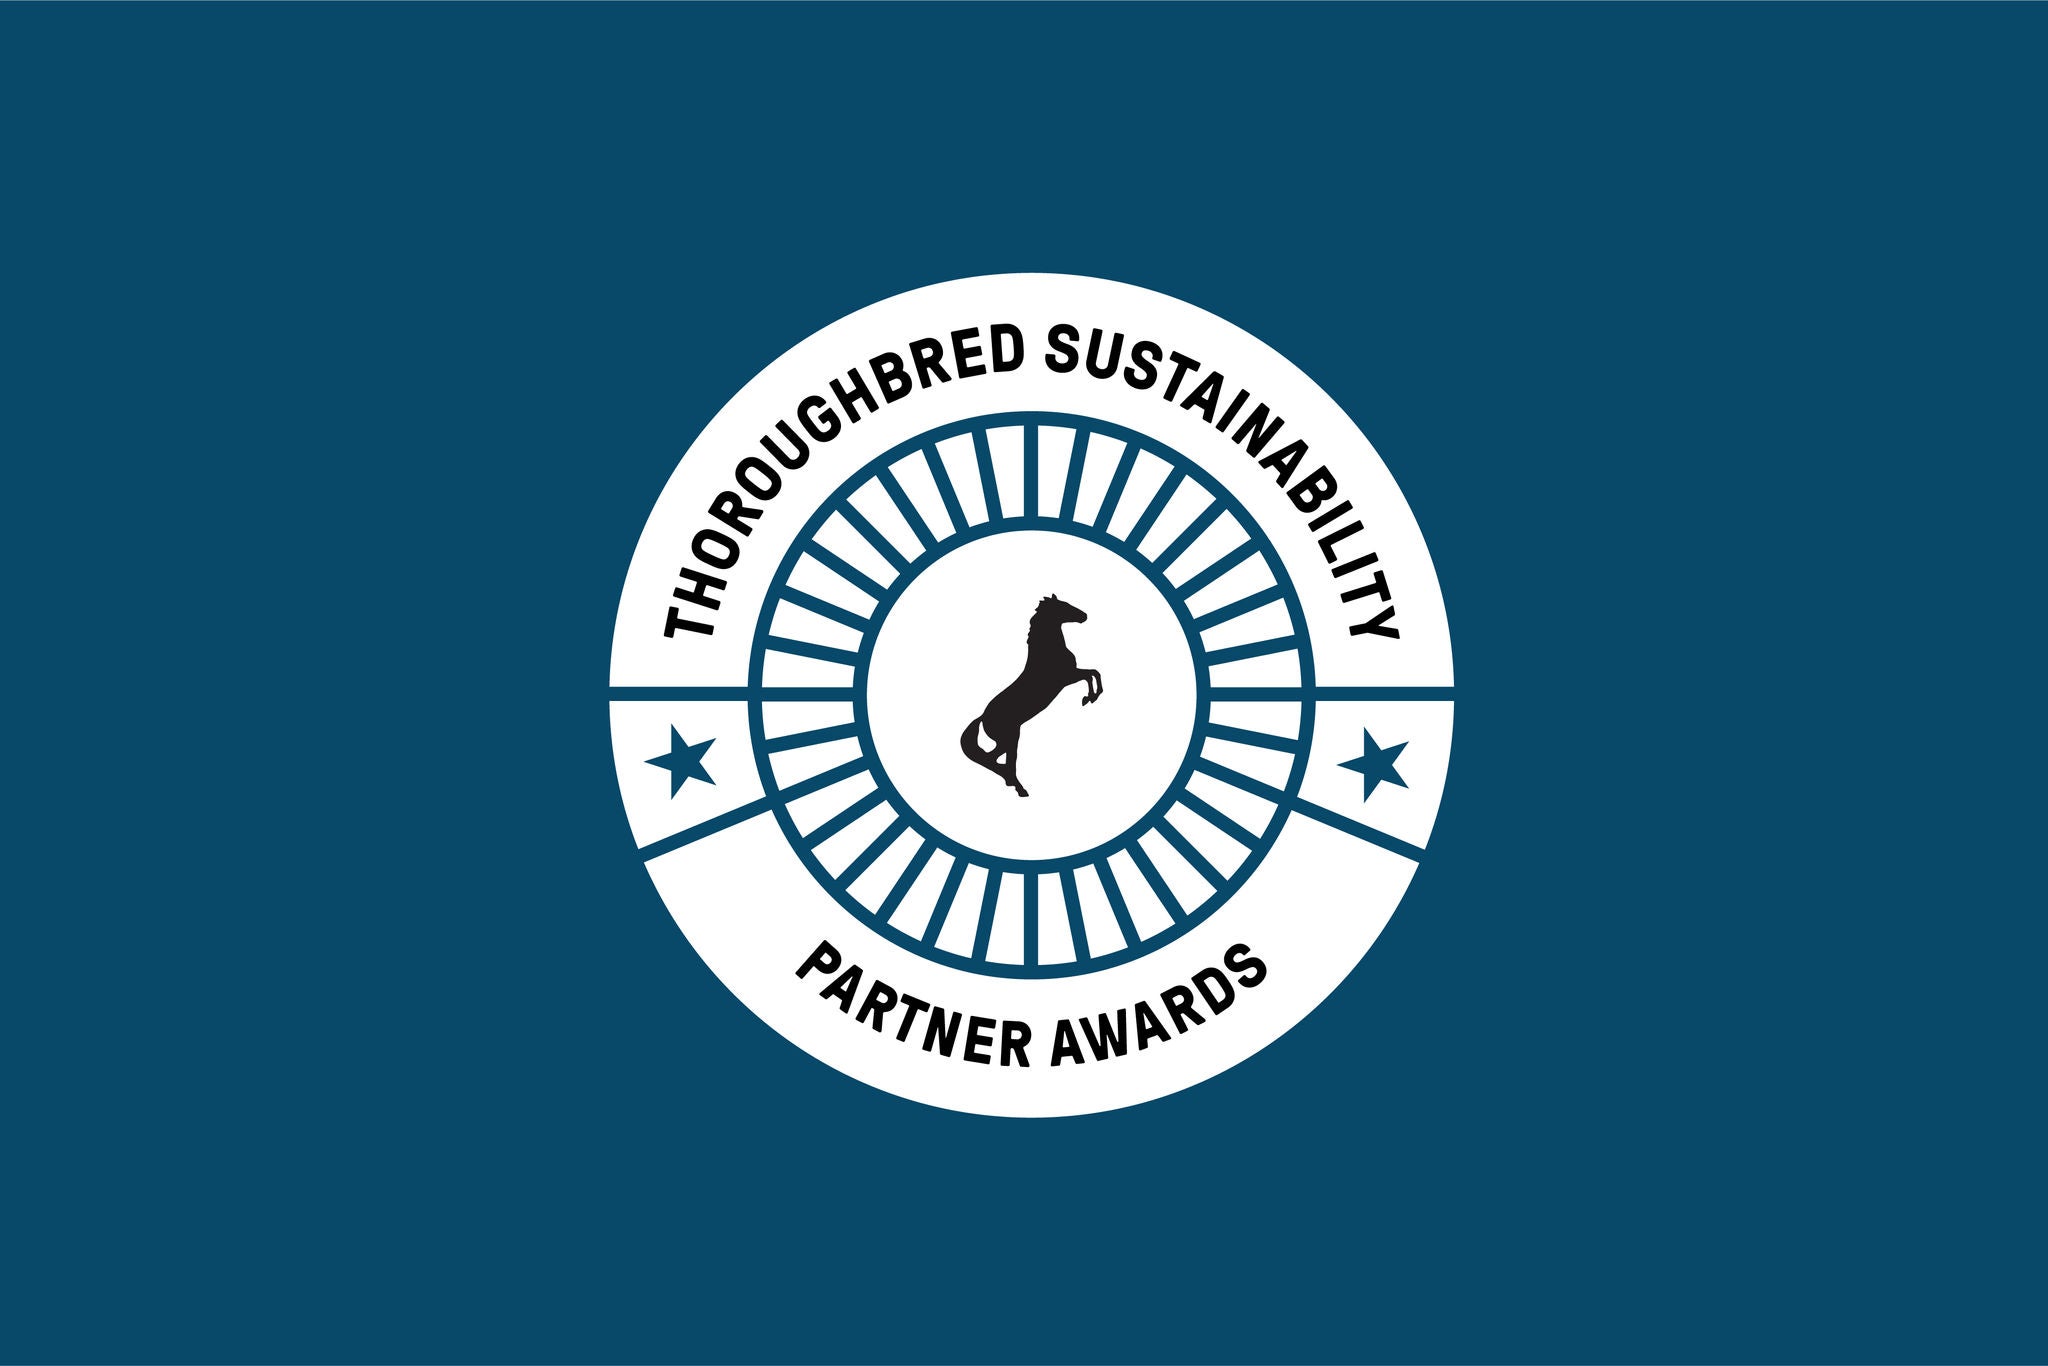 Round image with the text thoroughbred sustainability partner awards with the Norfolk Southern horse in the center on a blue square representing partners who work towards sustainable rail transport